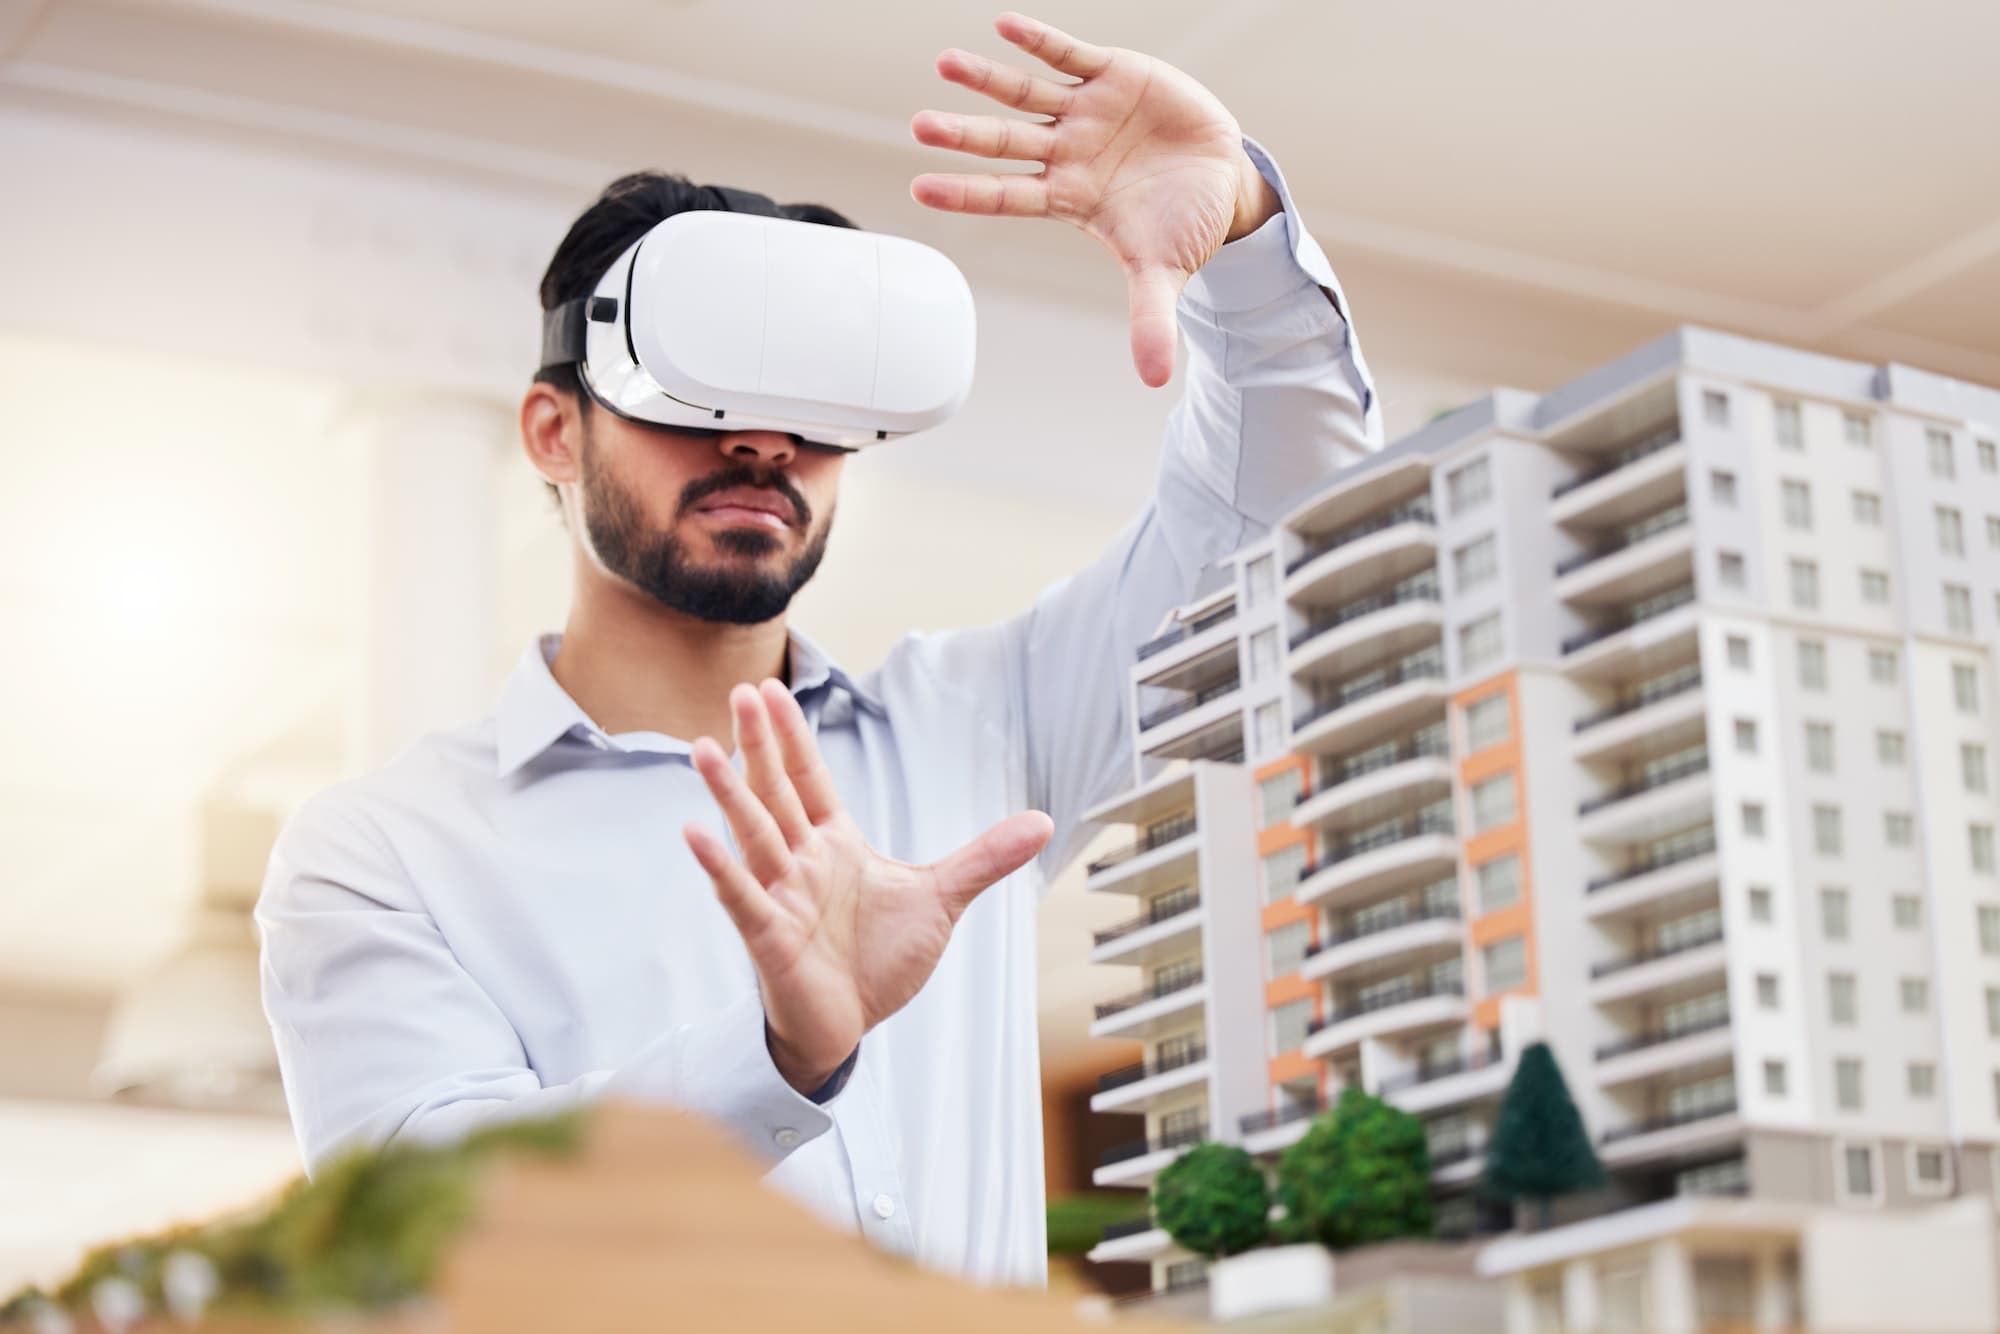 Architect using VR to visualize architecture model